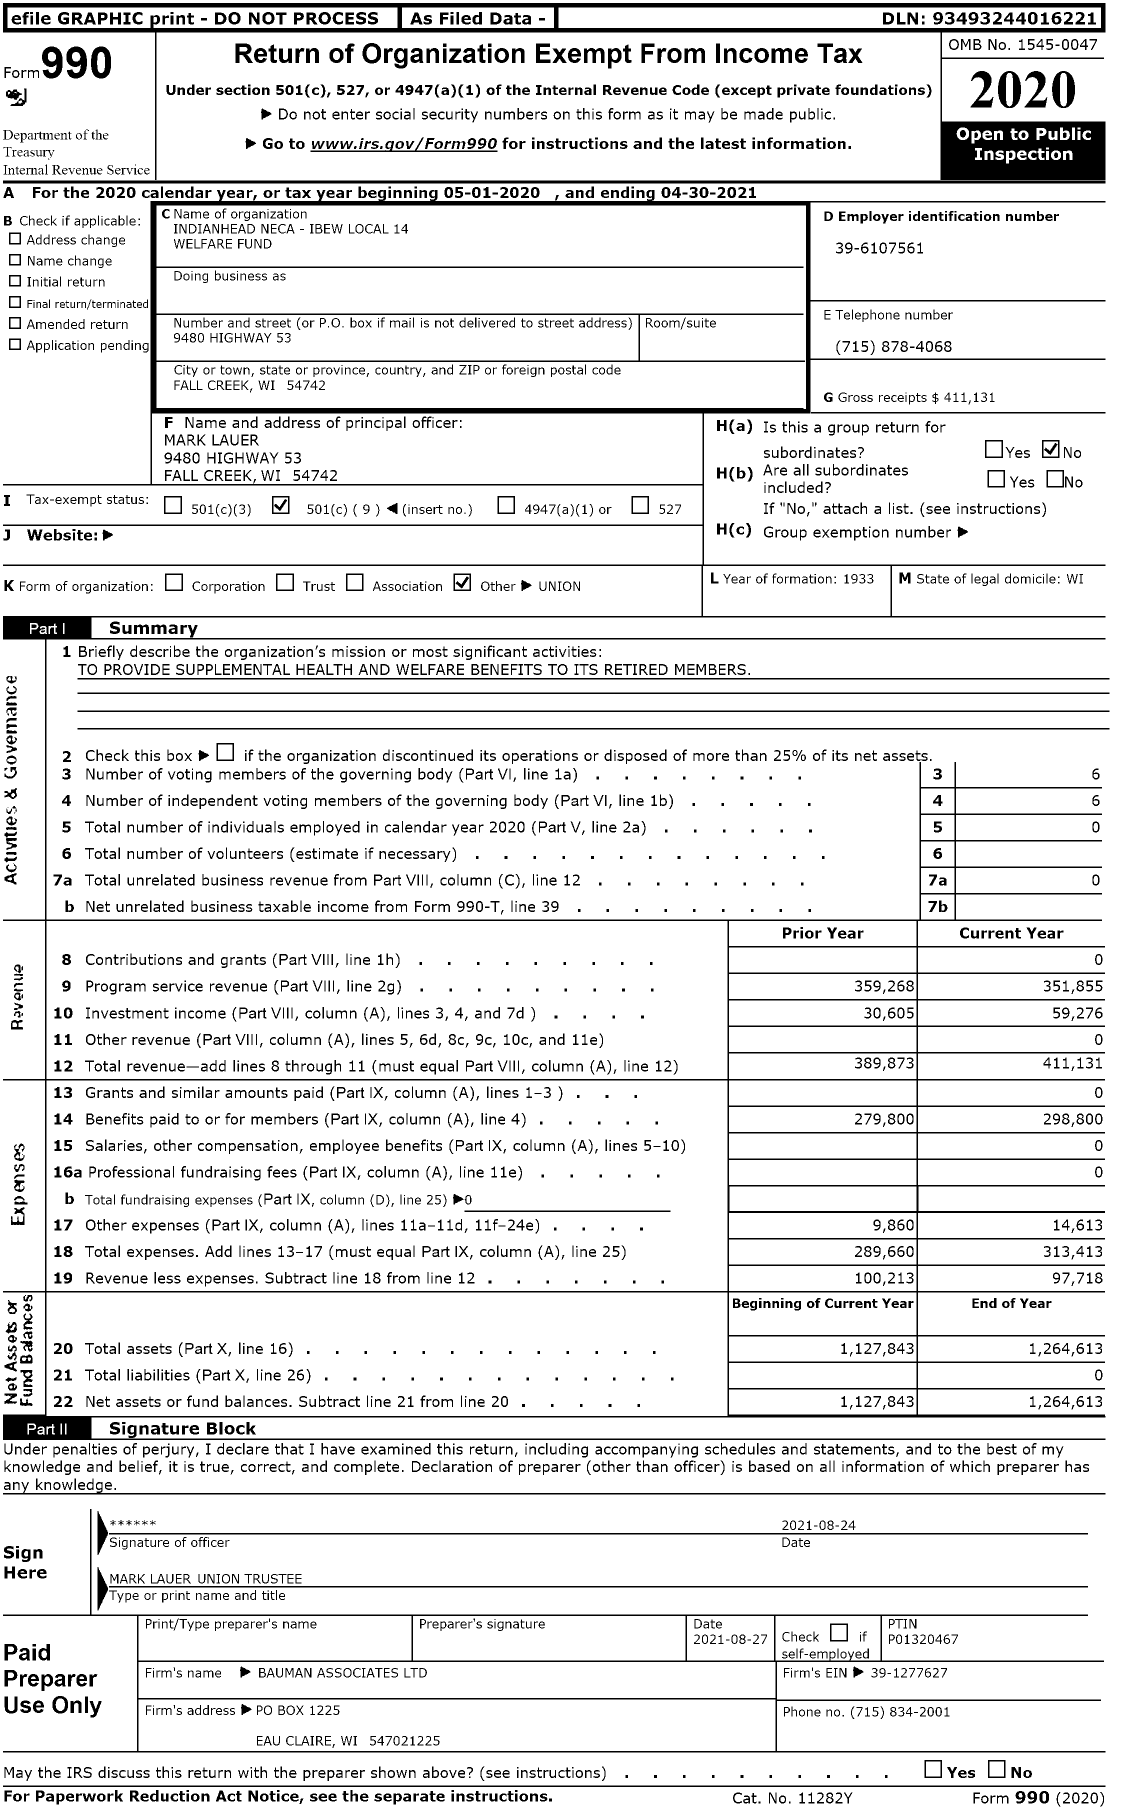 Image of first page of 2020 Form 990O for Indianhead Neca - IBEW Local 14 Welfare Fund